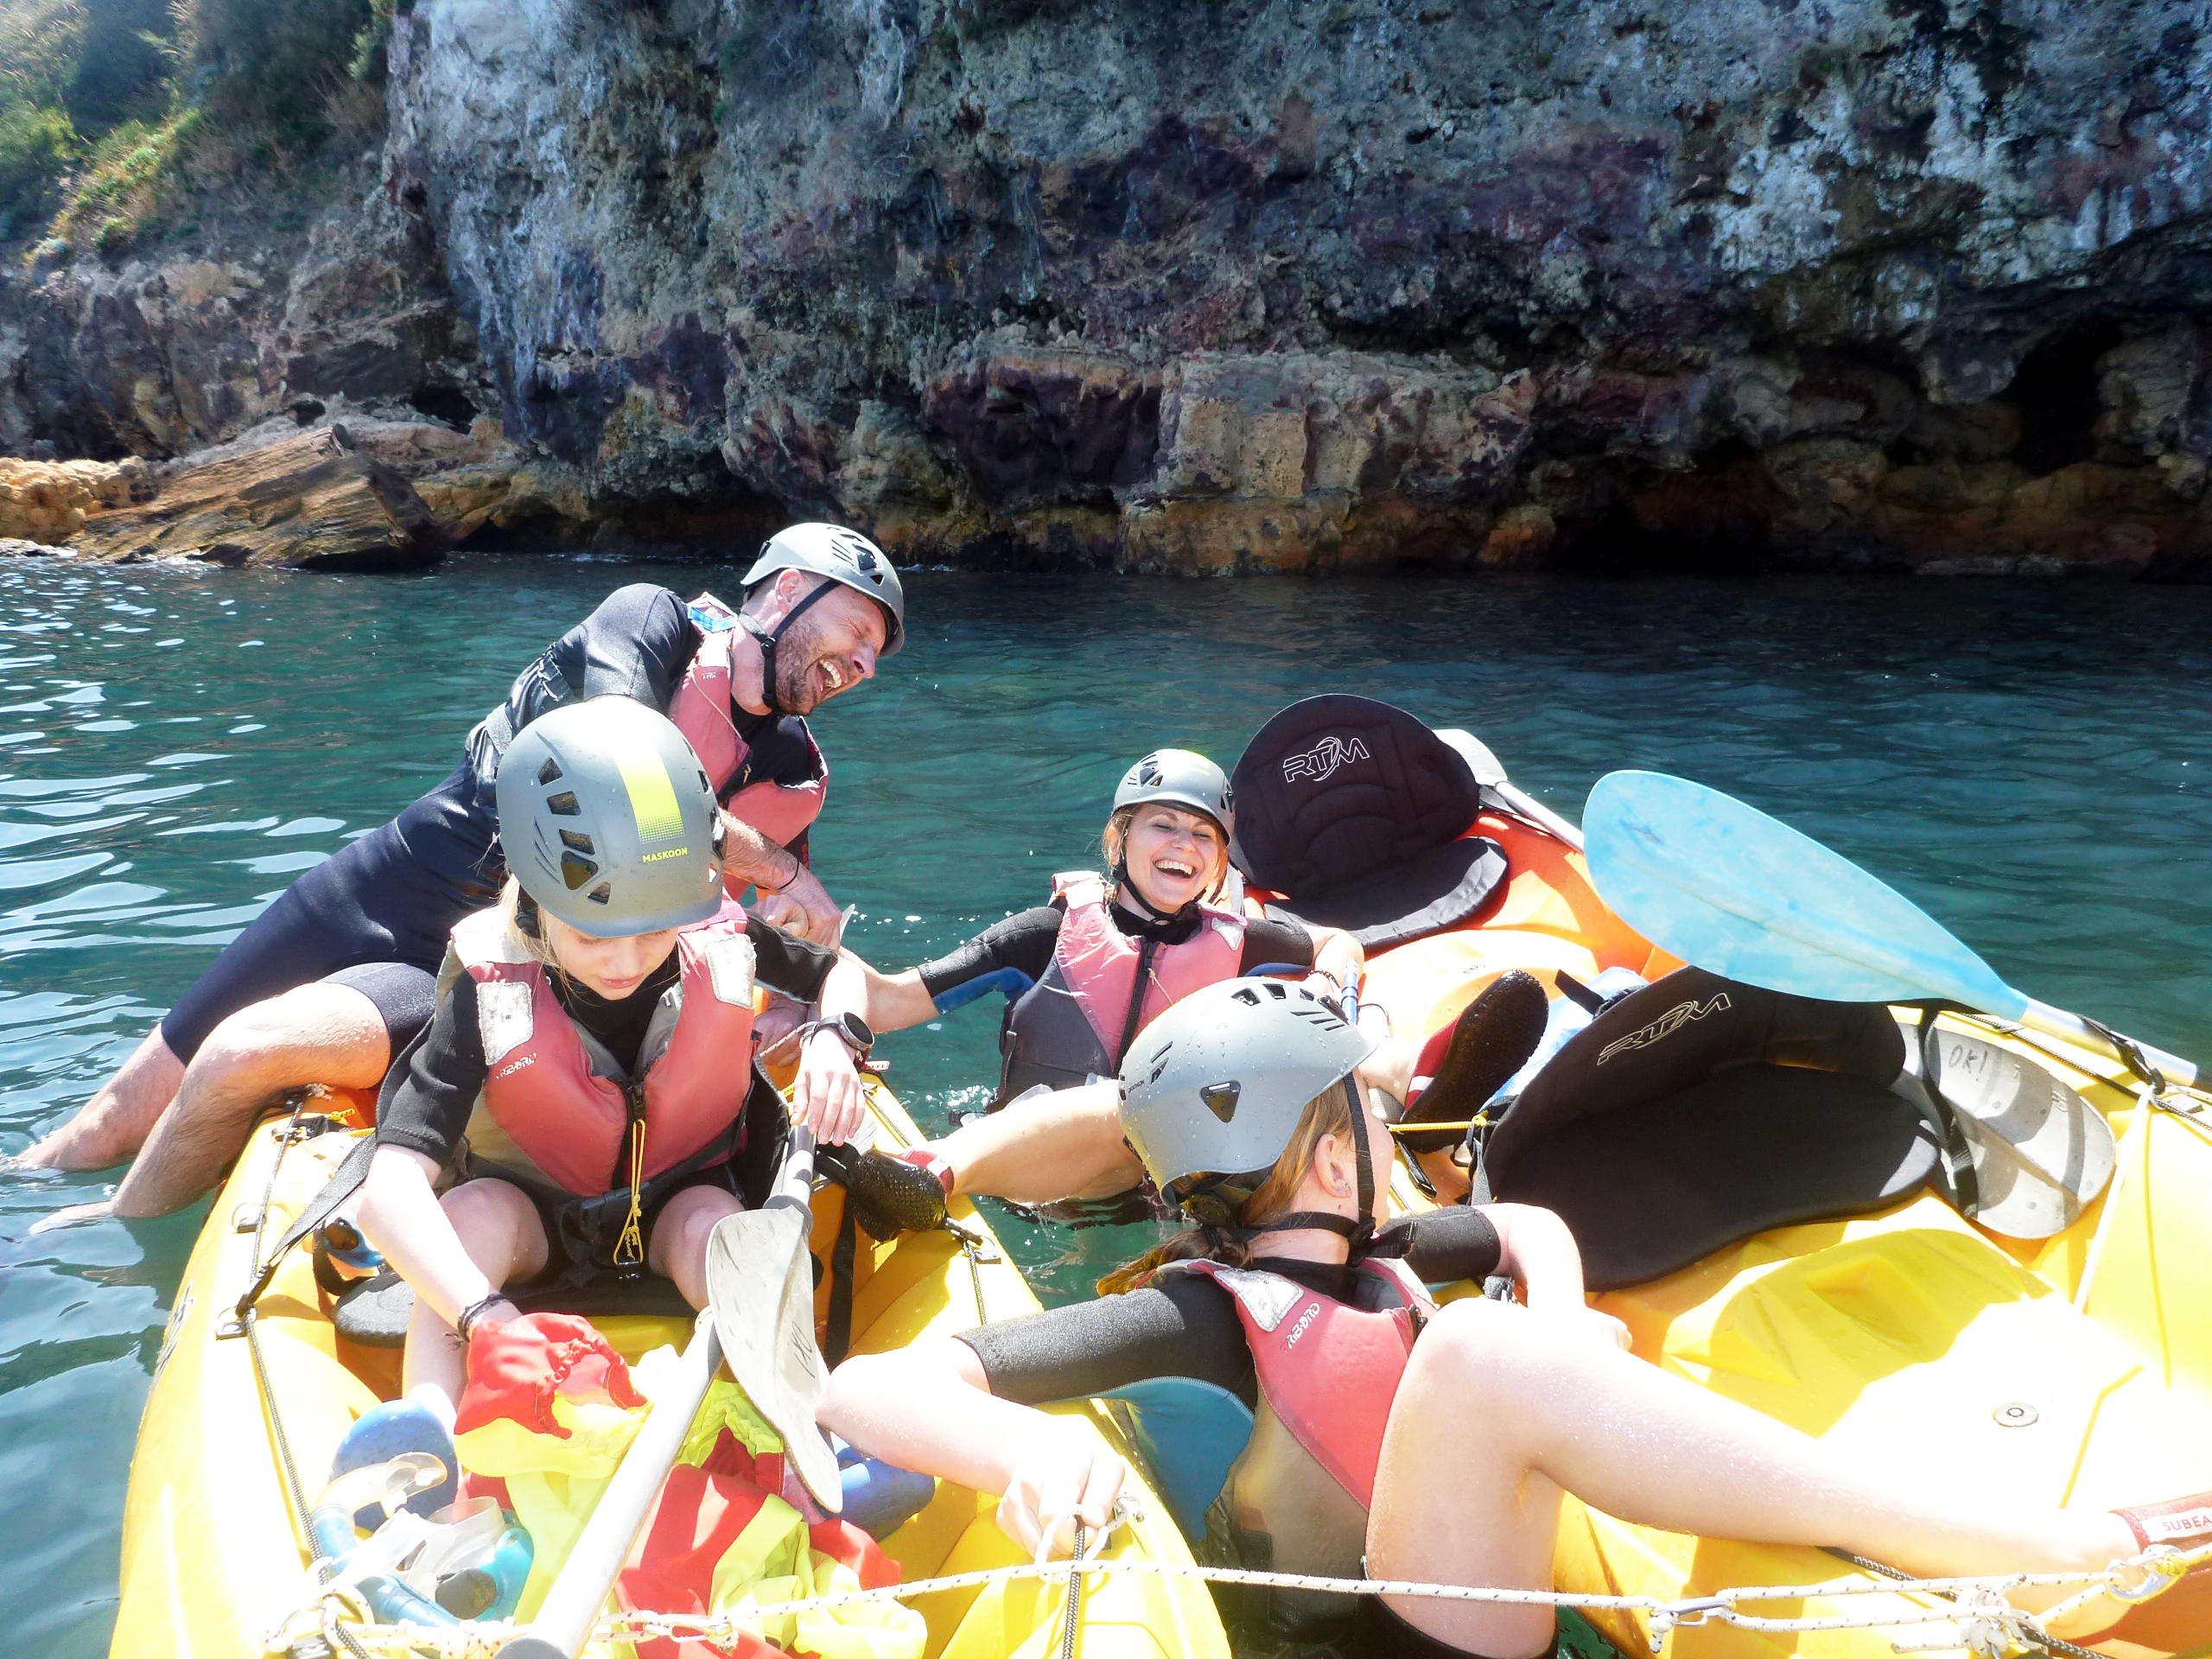 Daily guided excursions by Sit on Top Kayak + Coasteering Adventures to Aeolian Islands